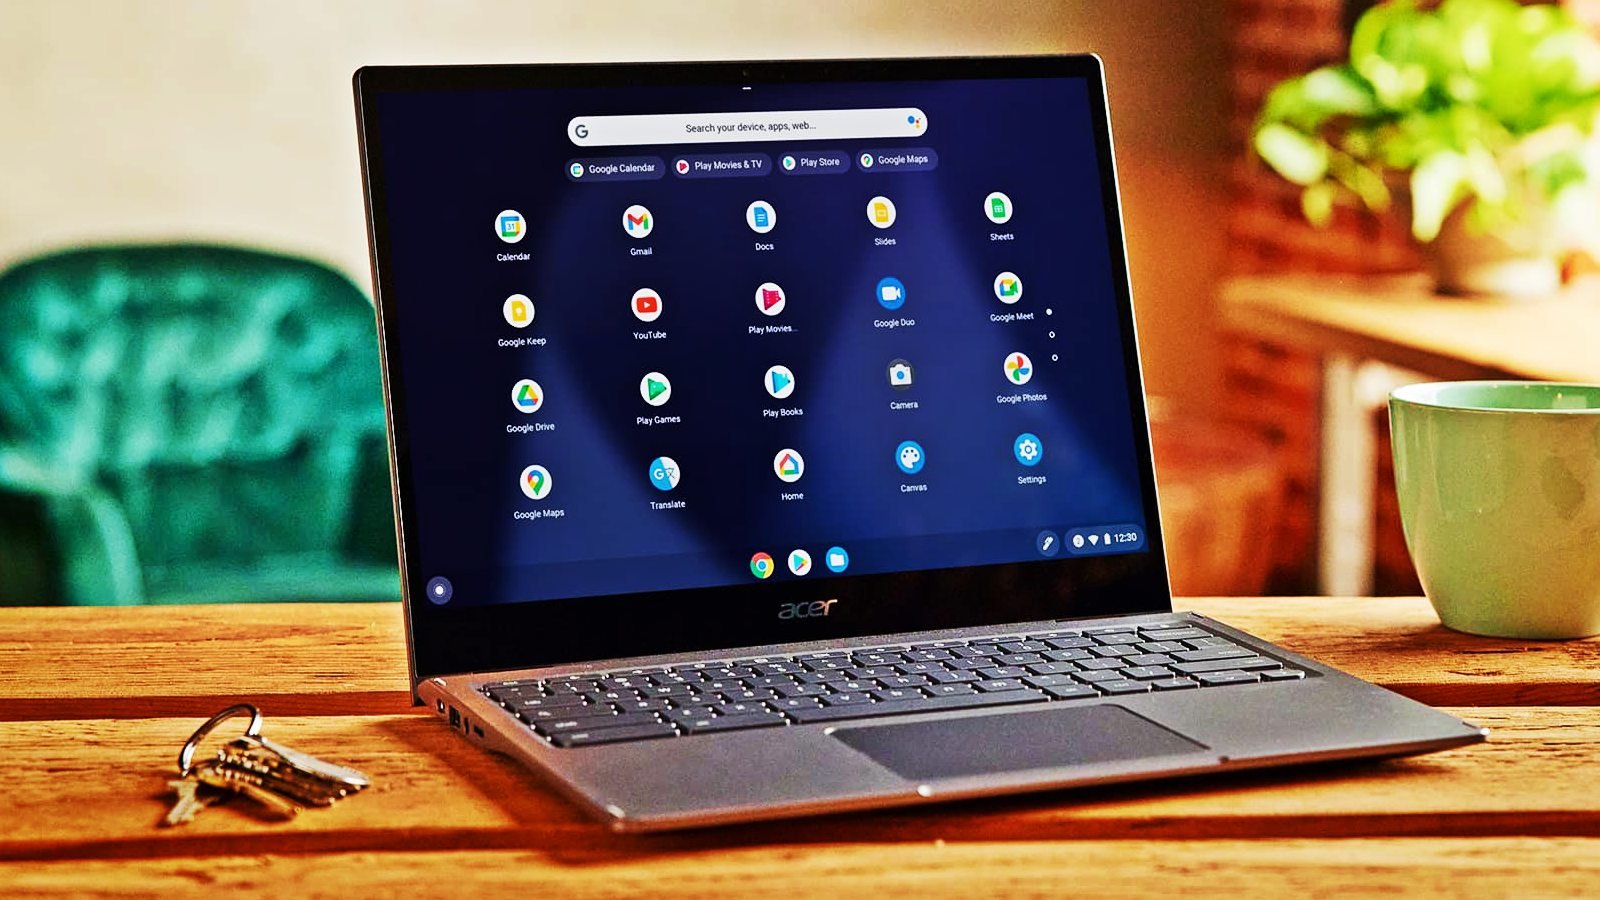 Keep connected with this deal on four HP Chromebooks